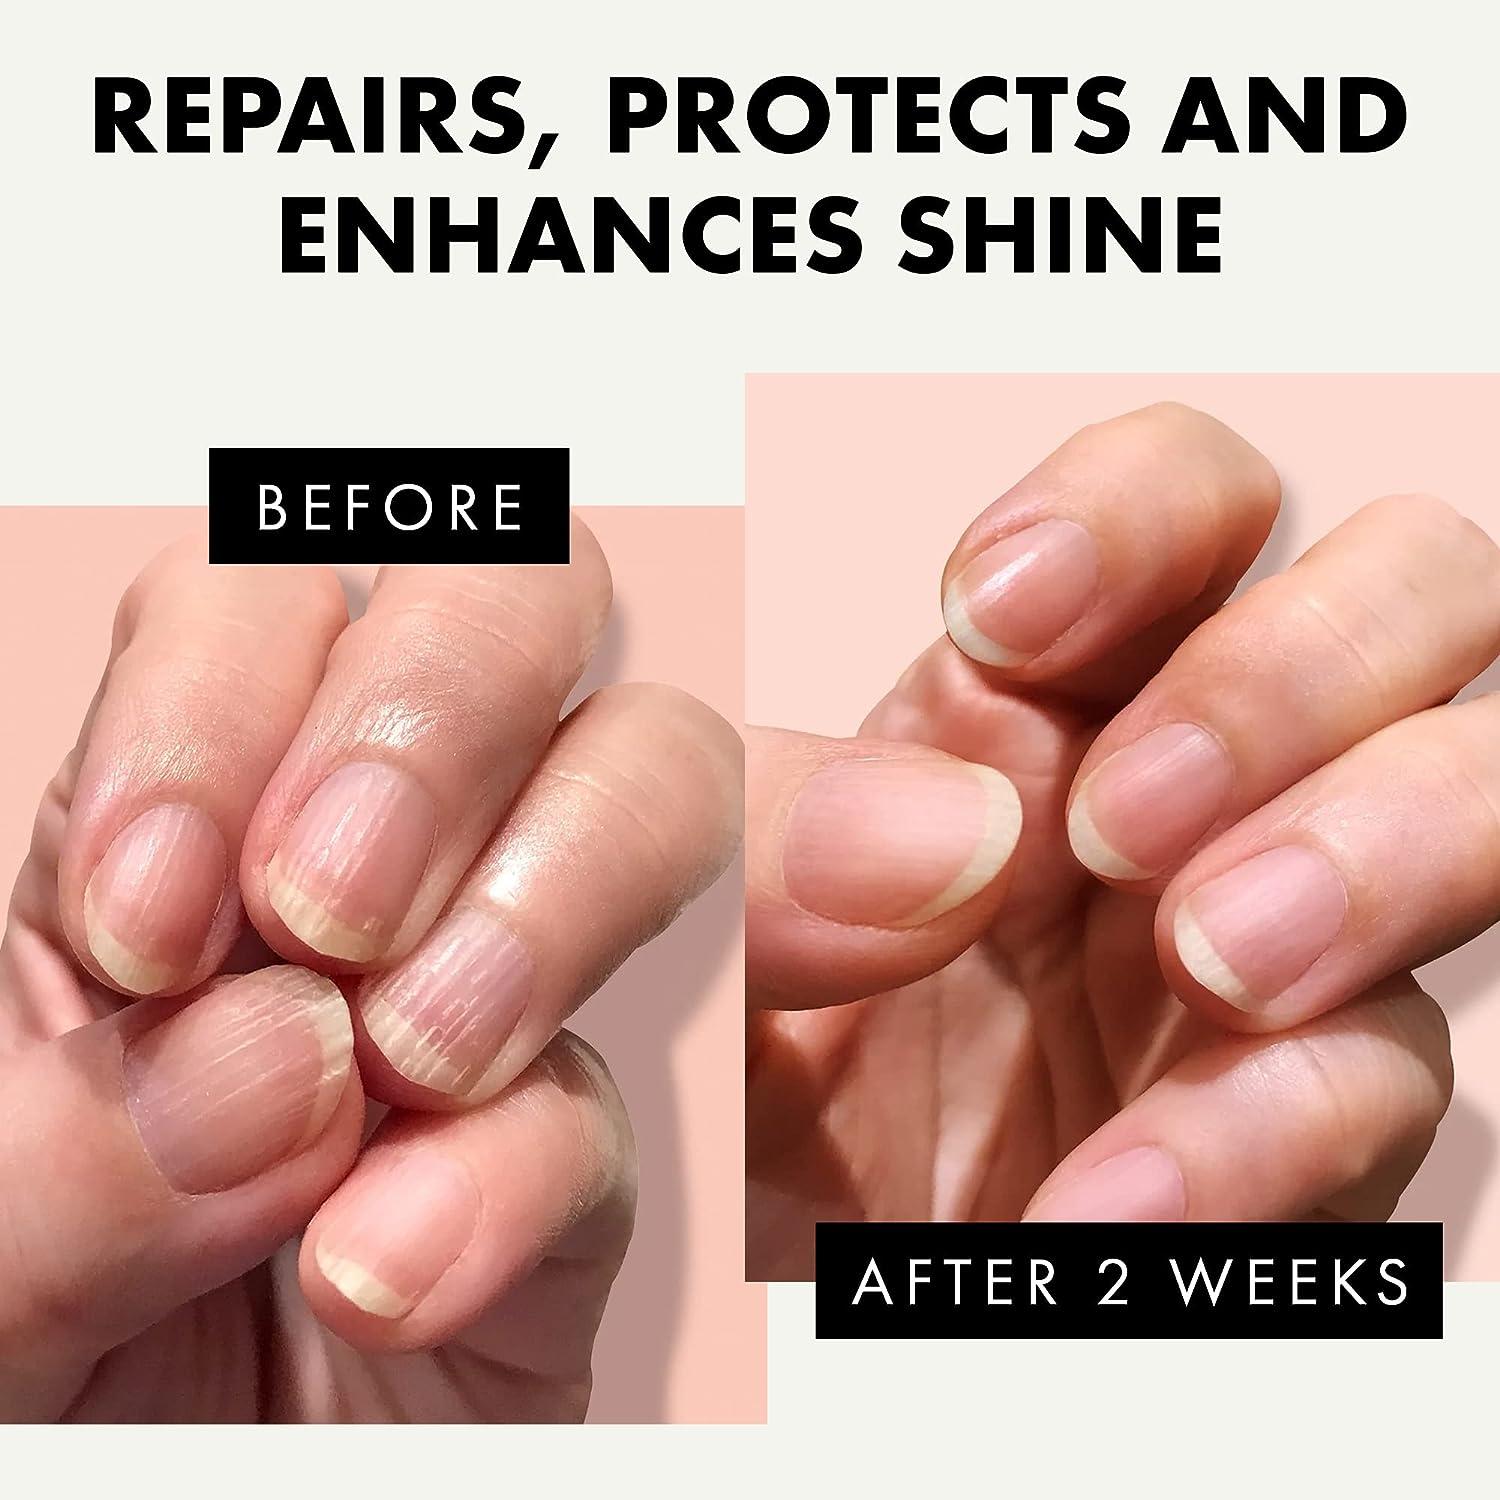 How To Refresh A Set Of Gel Nails Less Than 2 Weeks Old? - YouTube